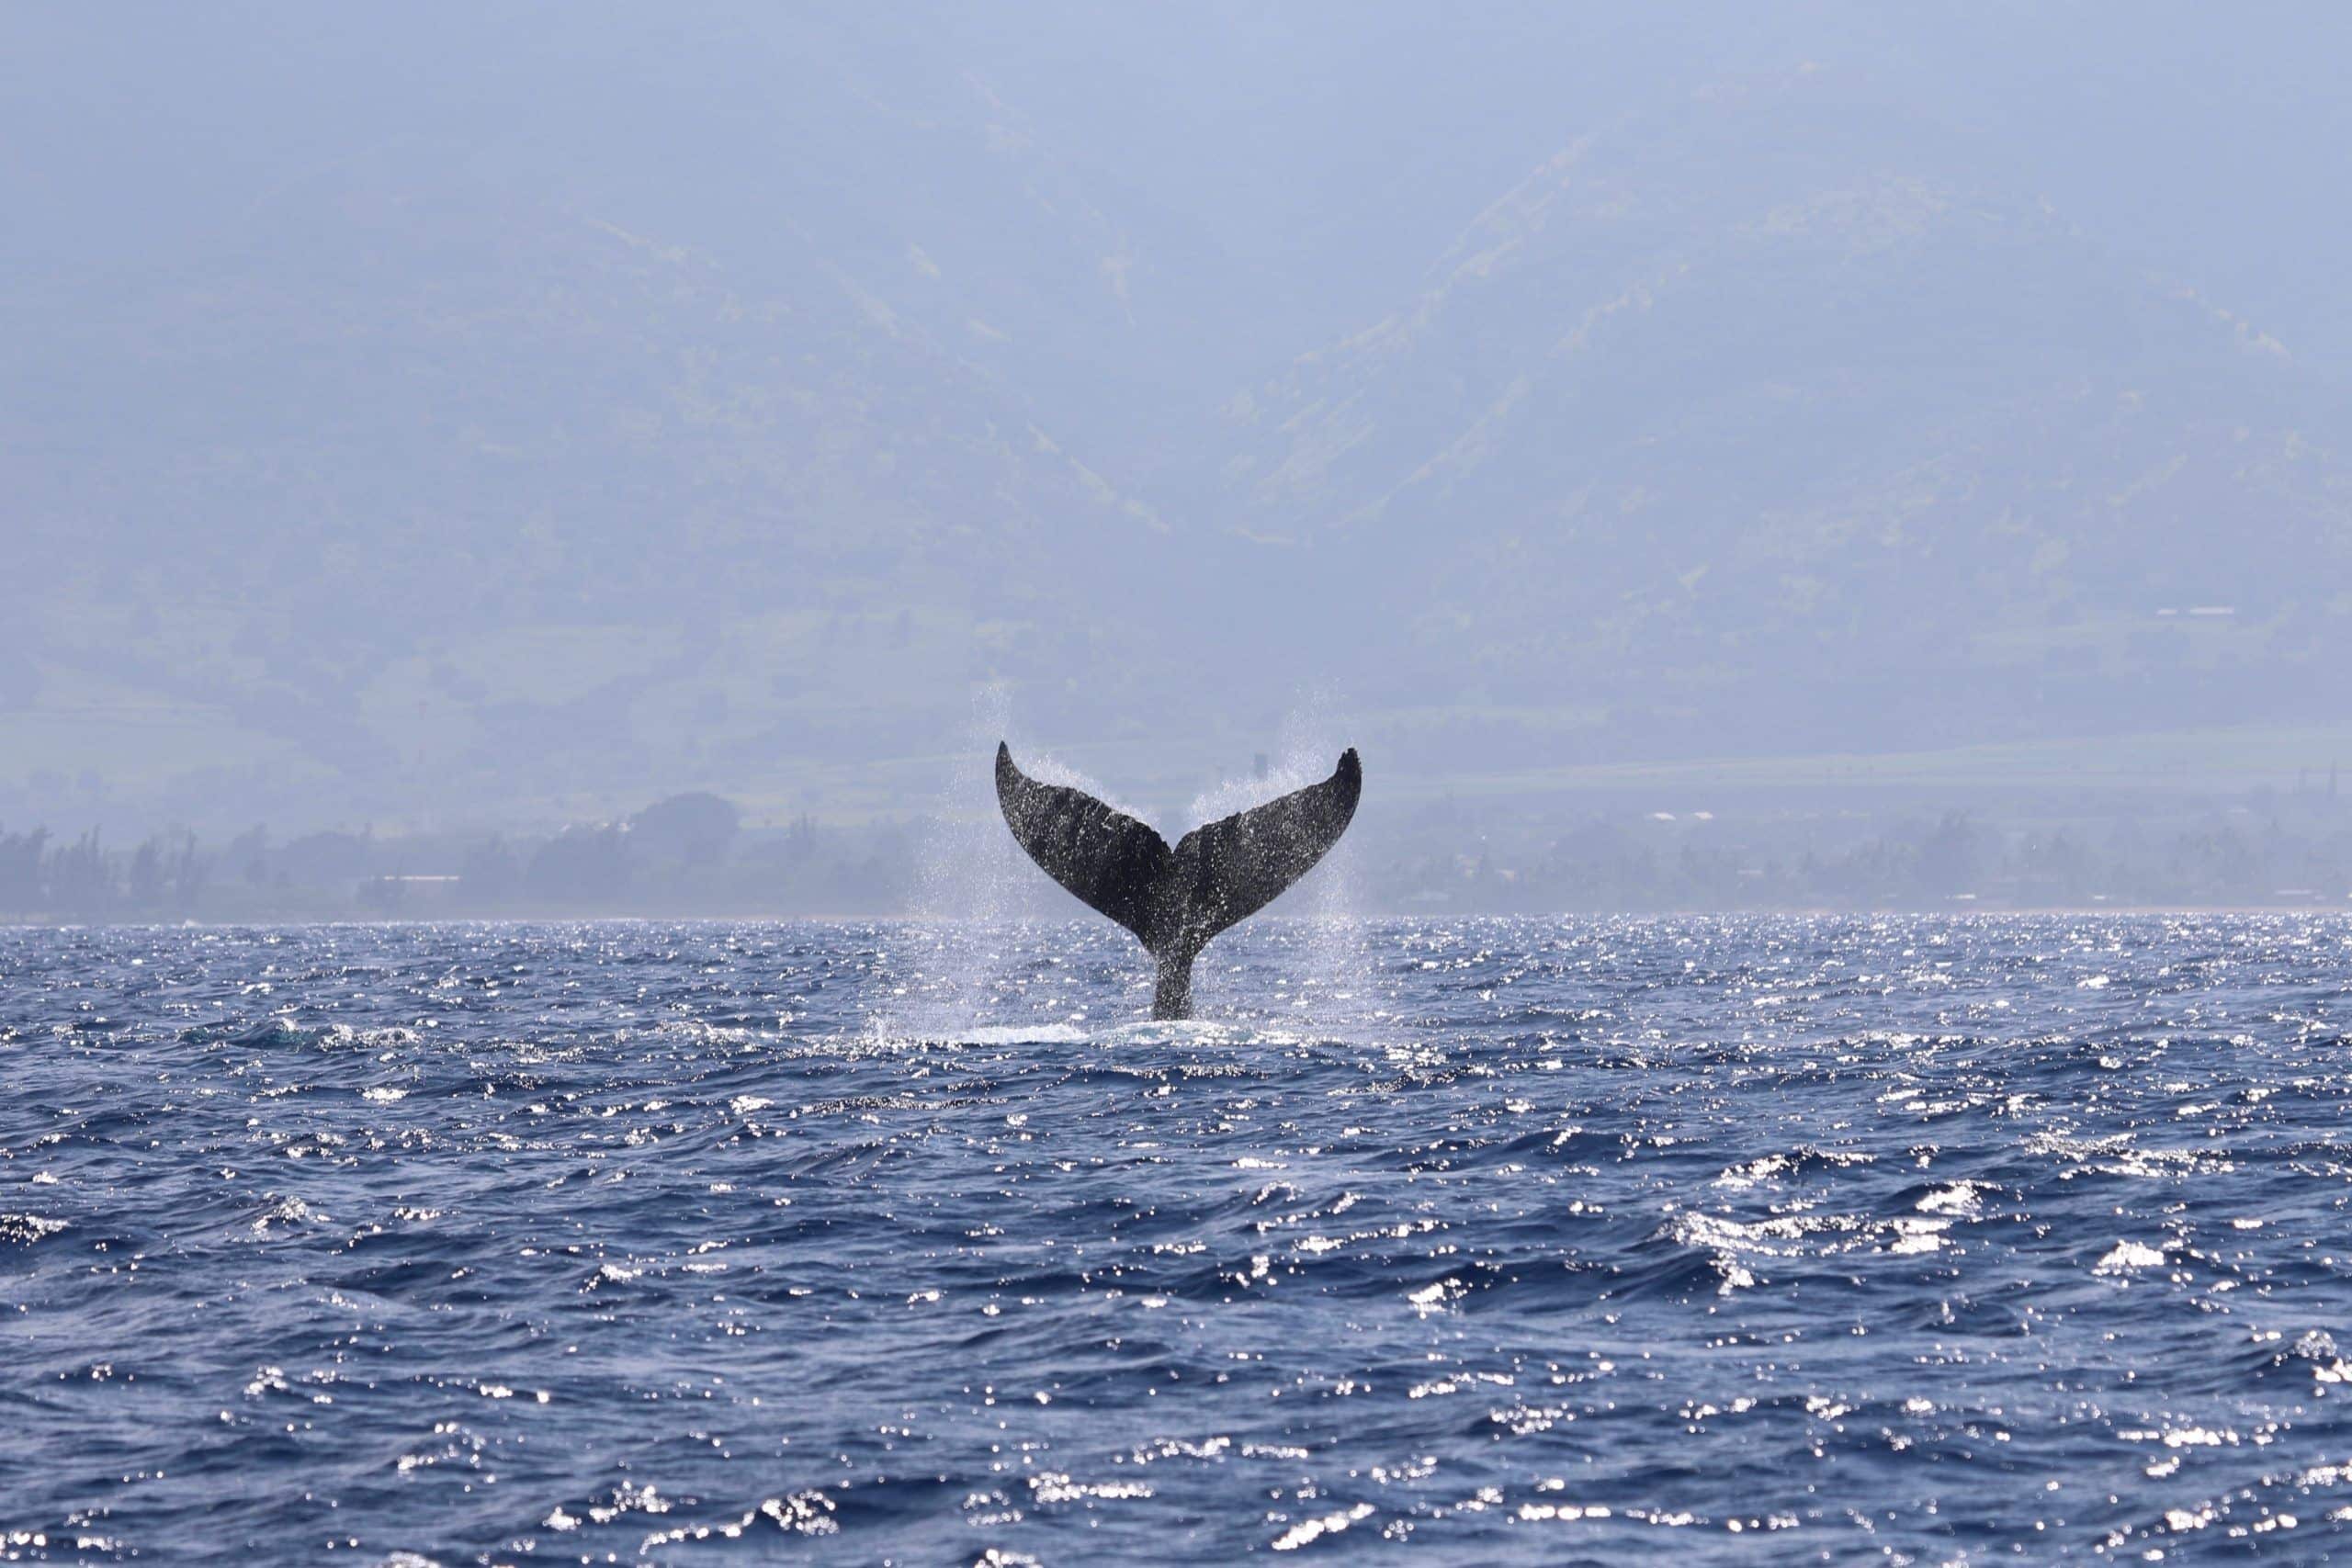 image of a whale tale of the coast of Oahu. Boat tours for whale watching on Oahu's North Shore are provided by private tour companies.